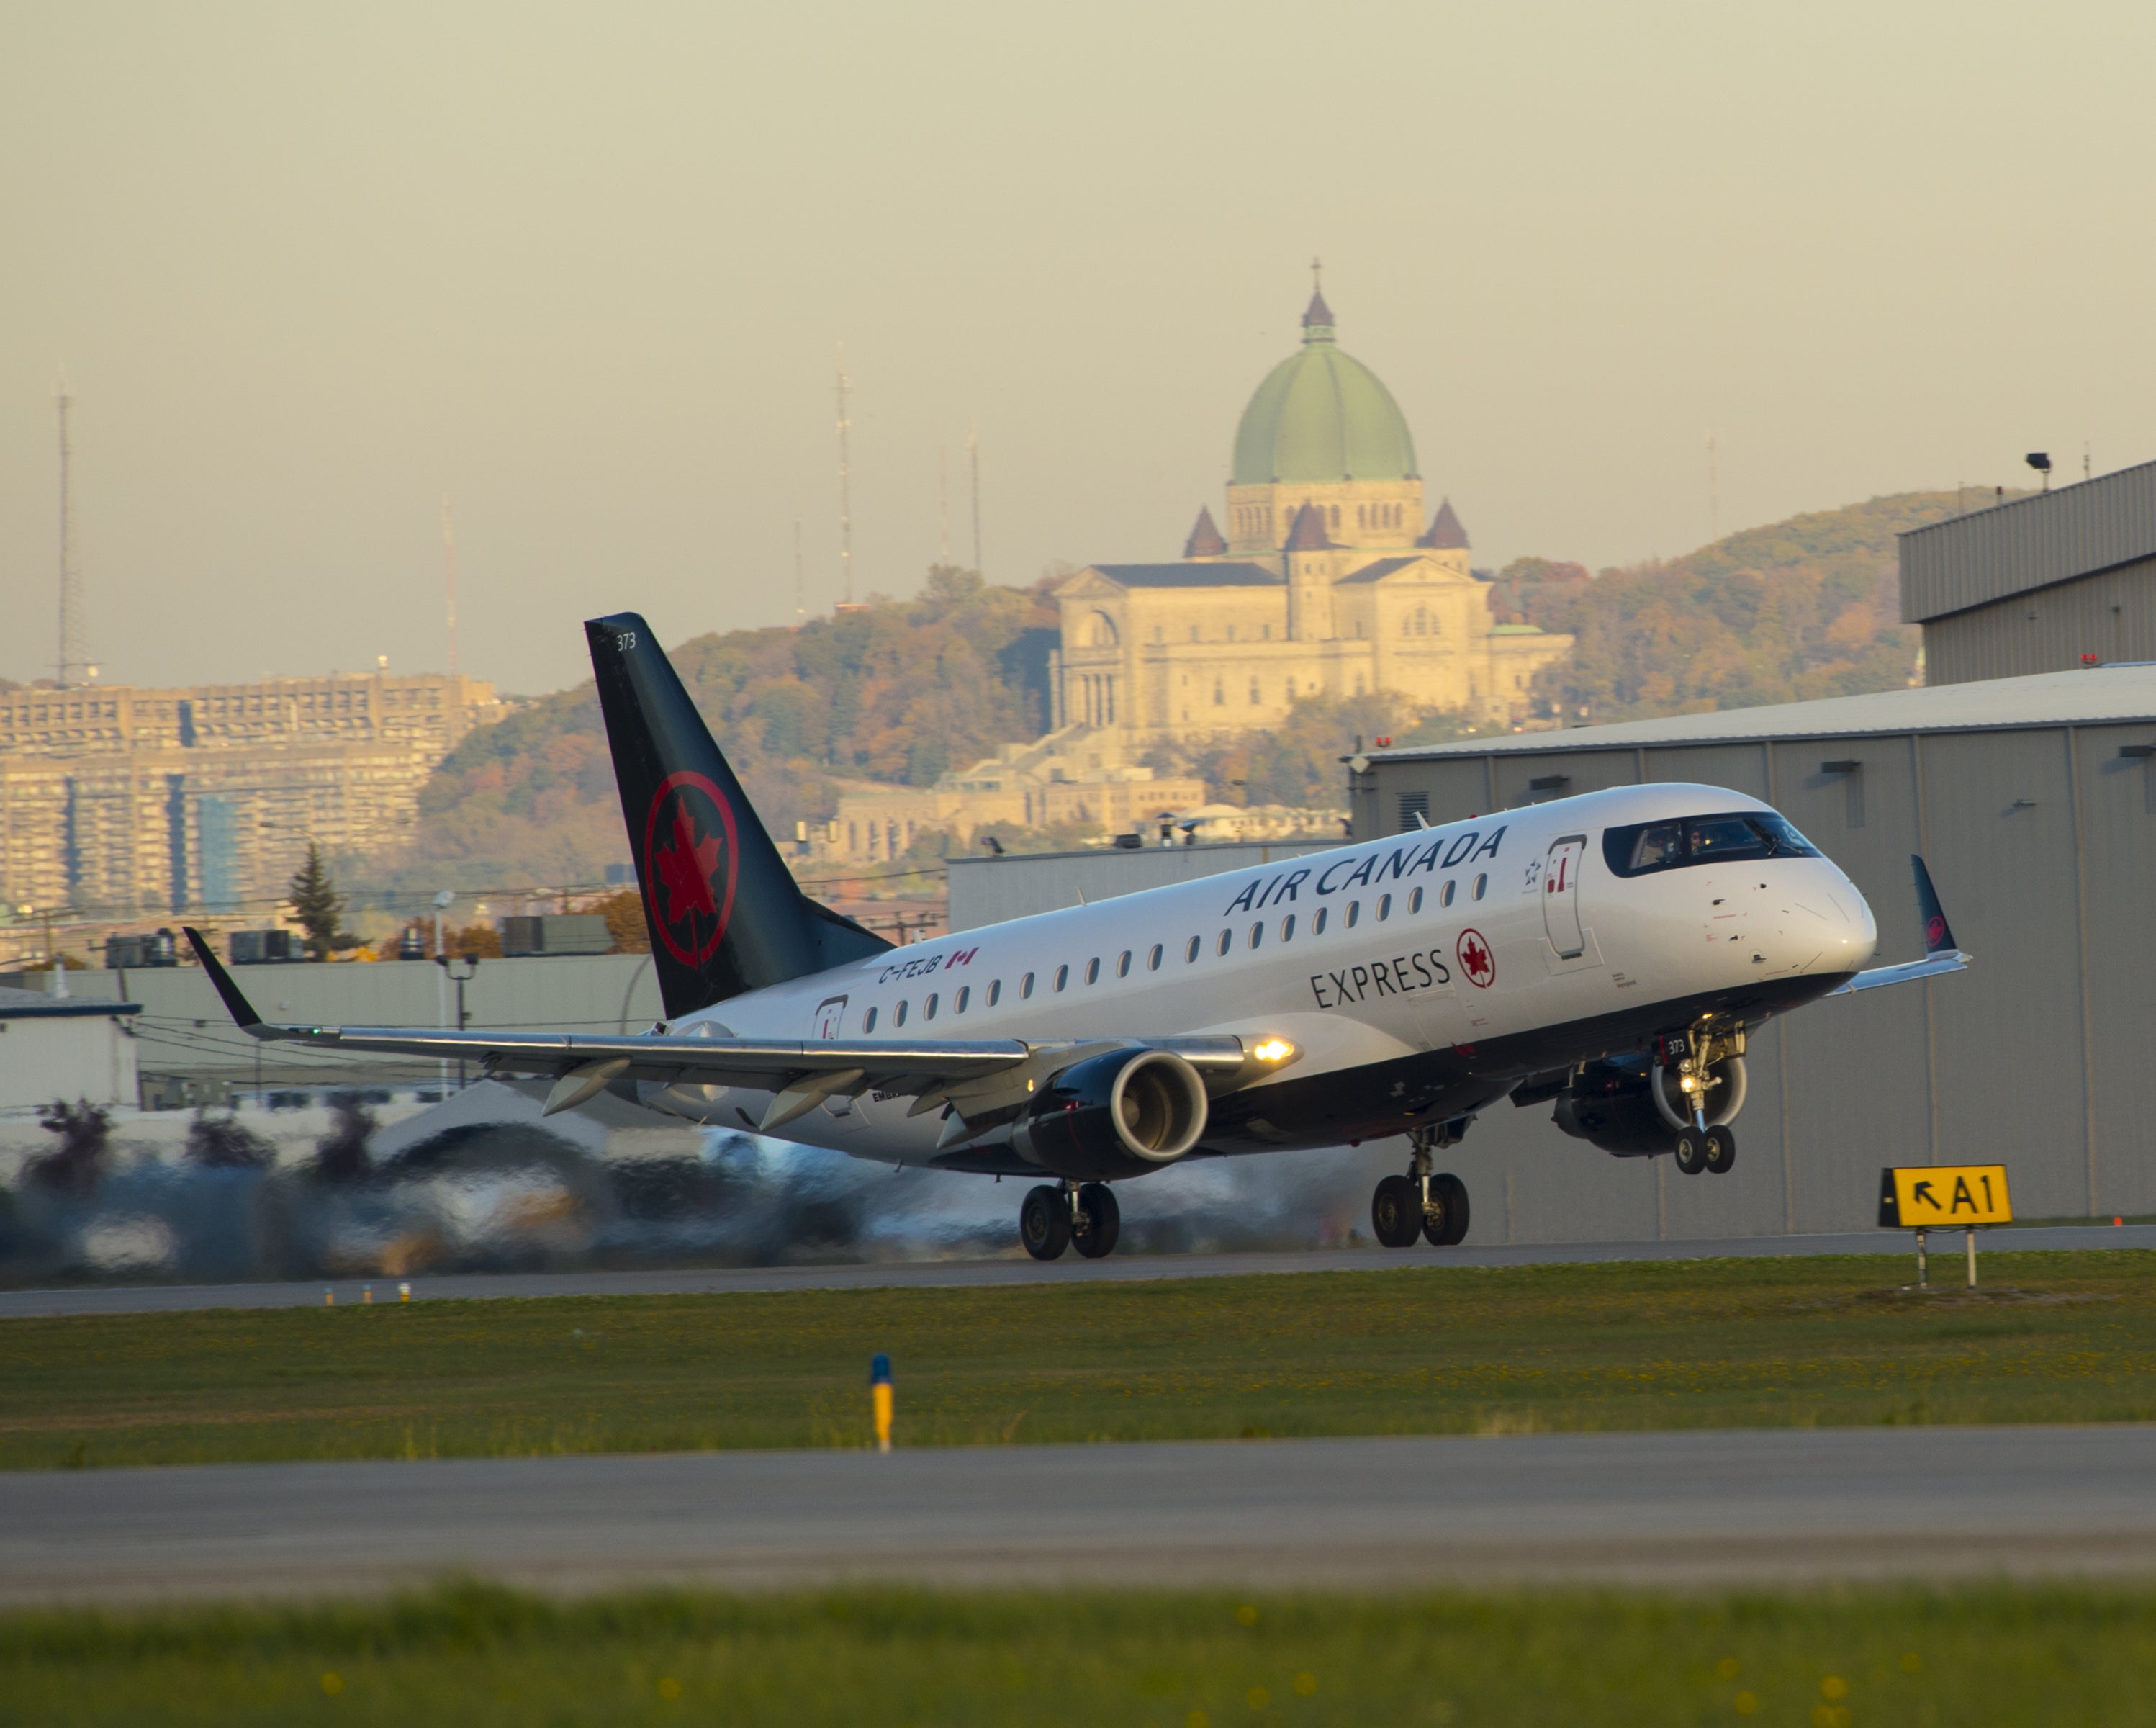 Air Canada Express E175 on takeoff